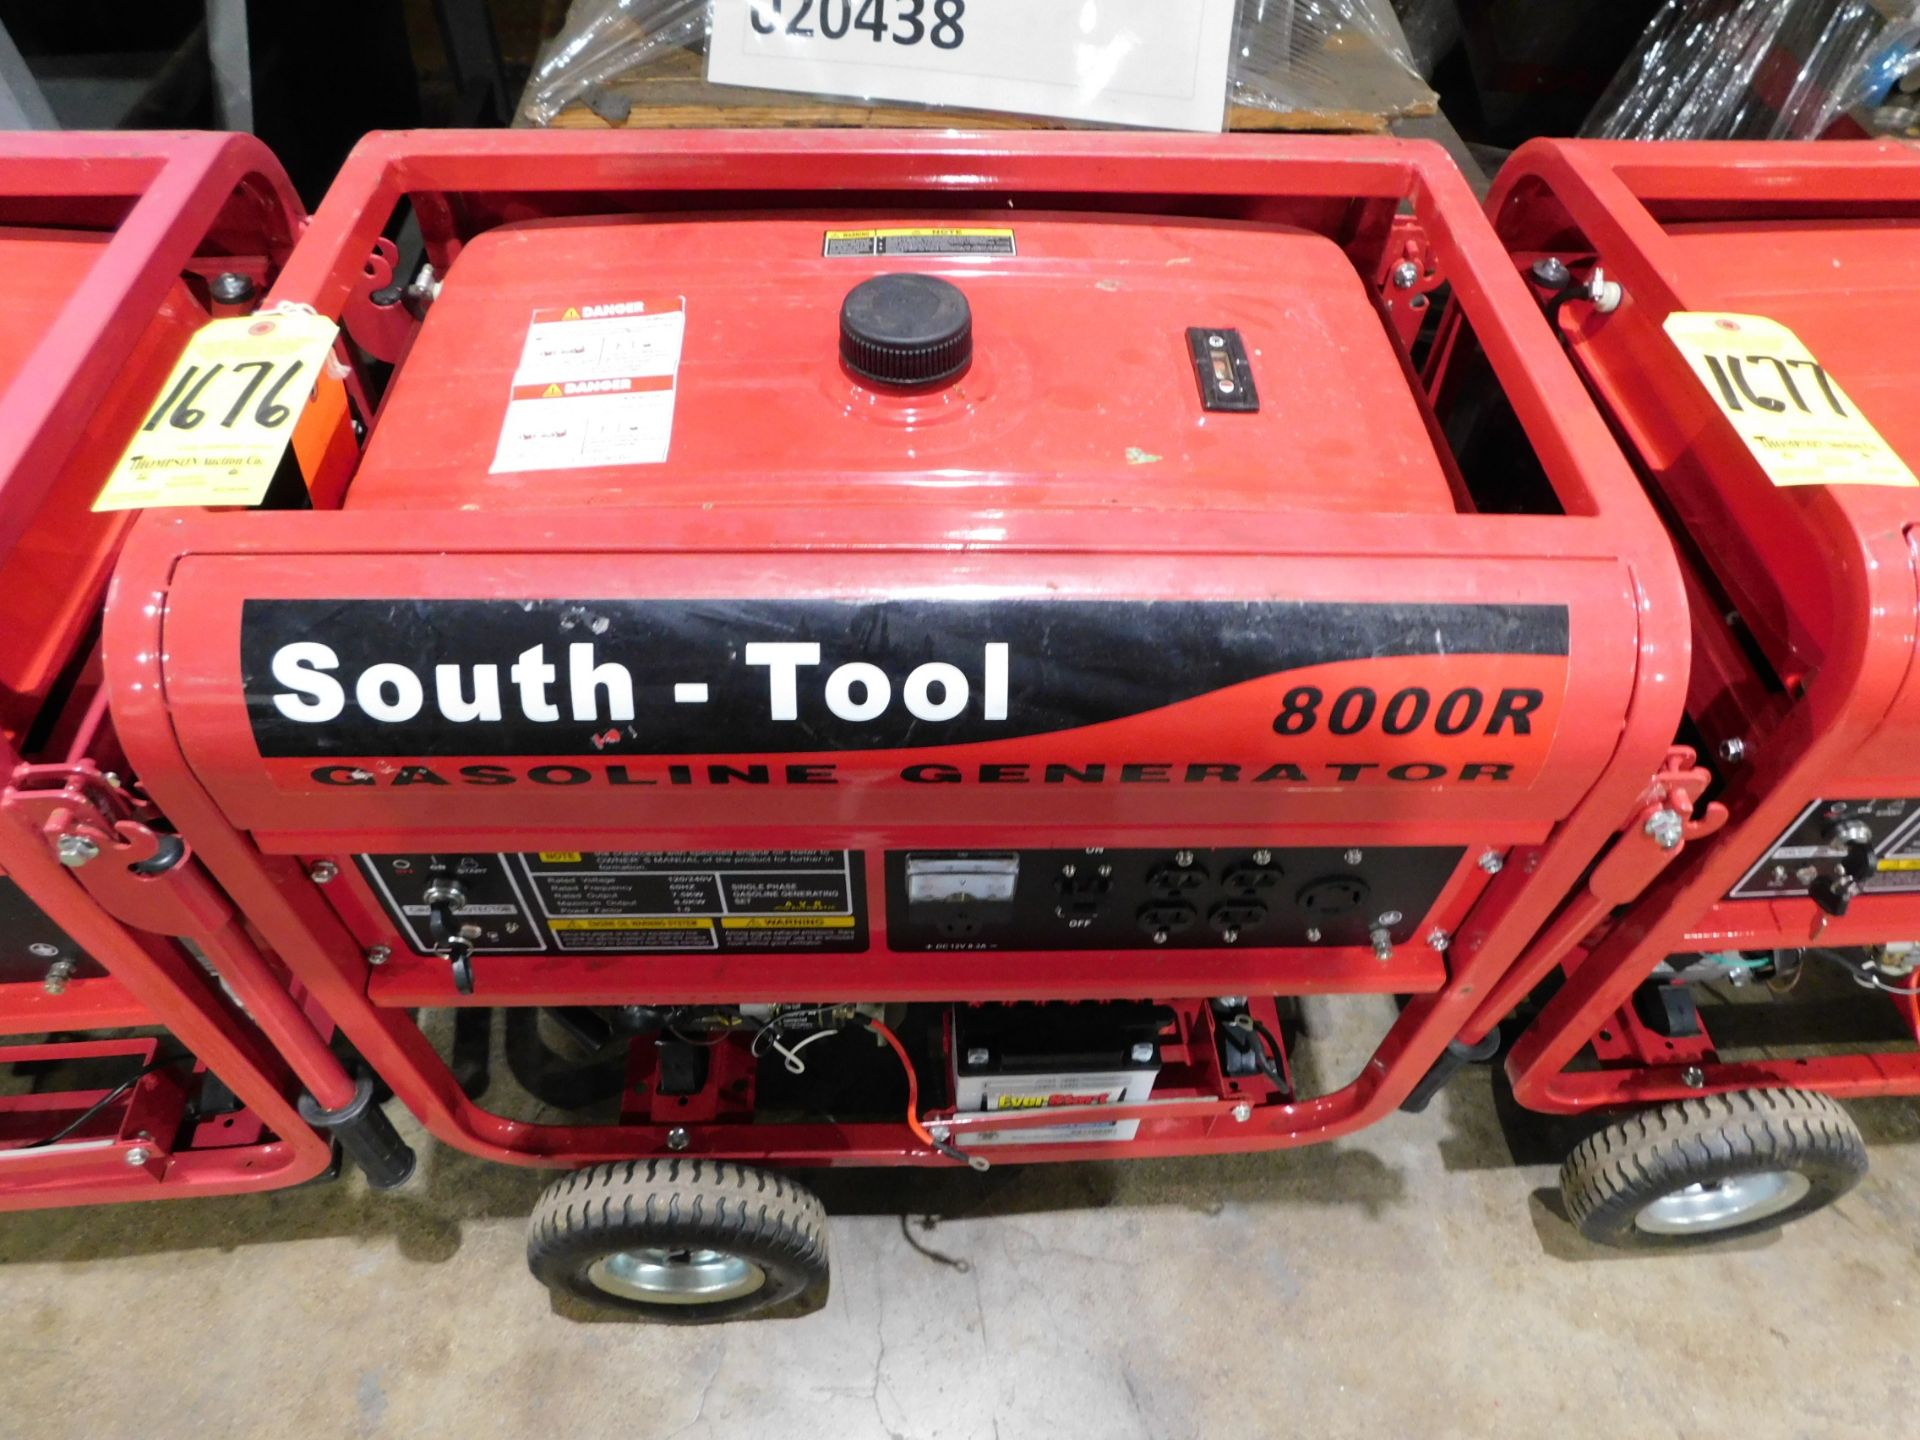 South Tool Model 80002R Gas Powered Generator, 8000 Max Watts 15H.P. Condition Unknown